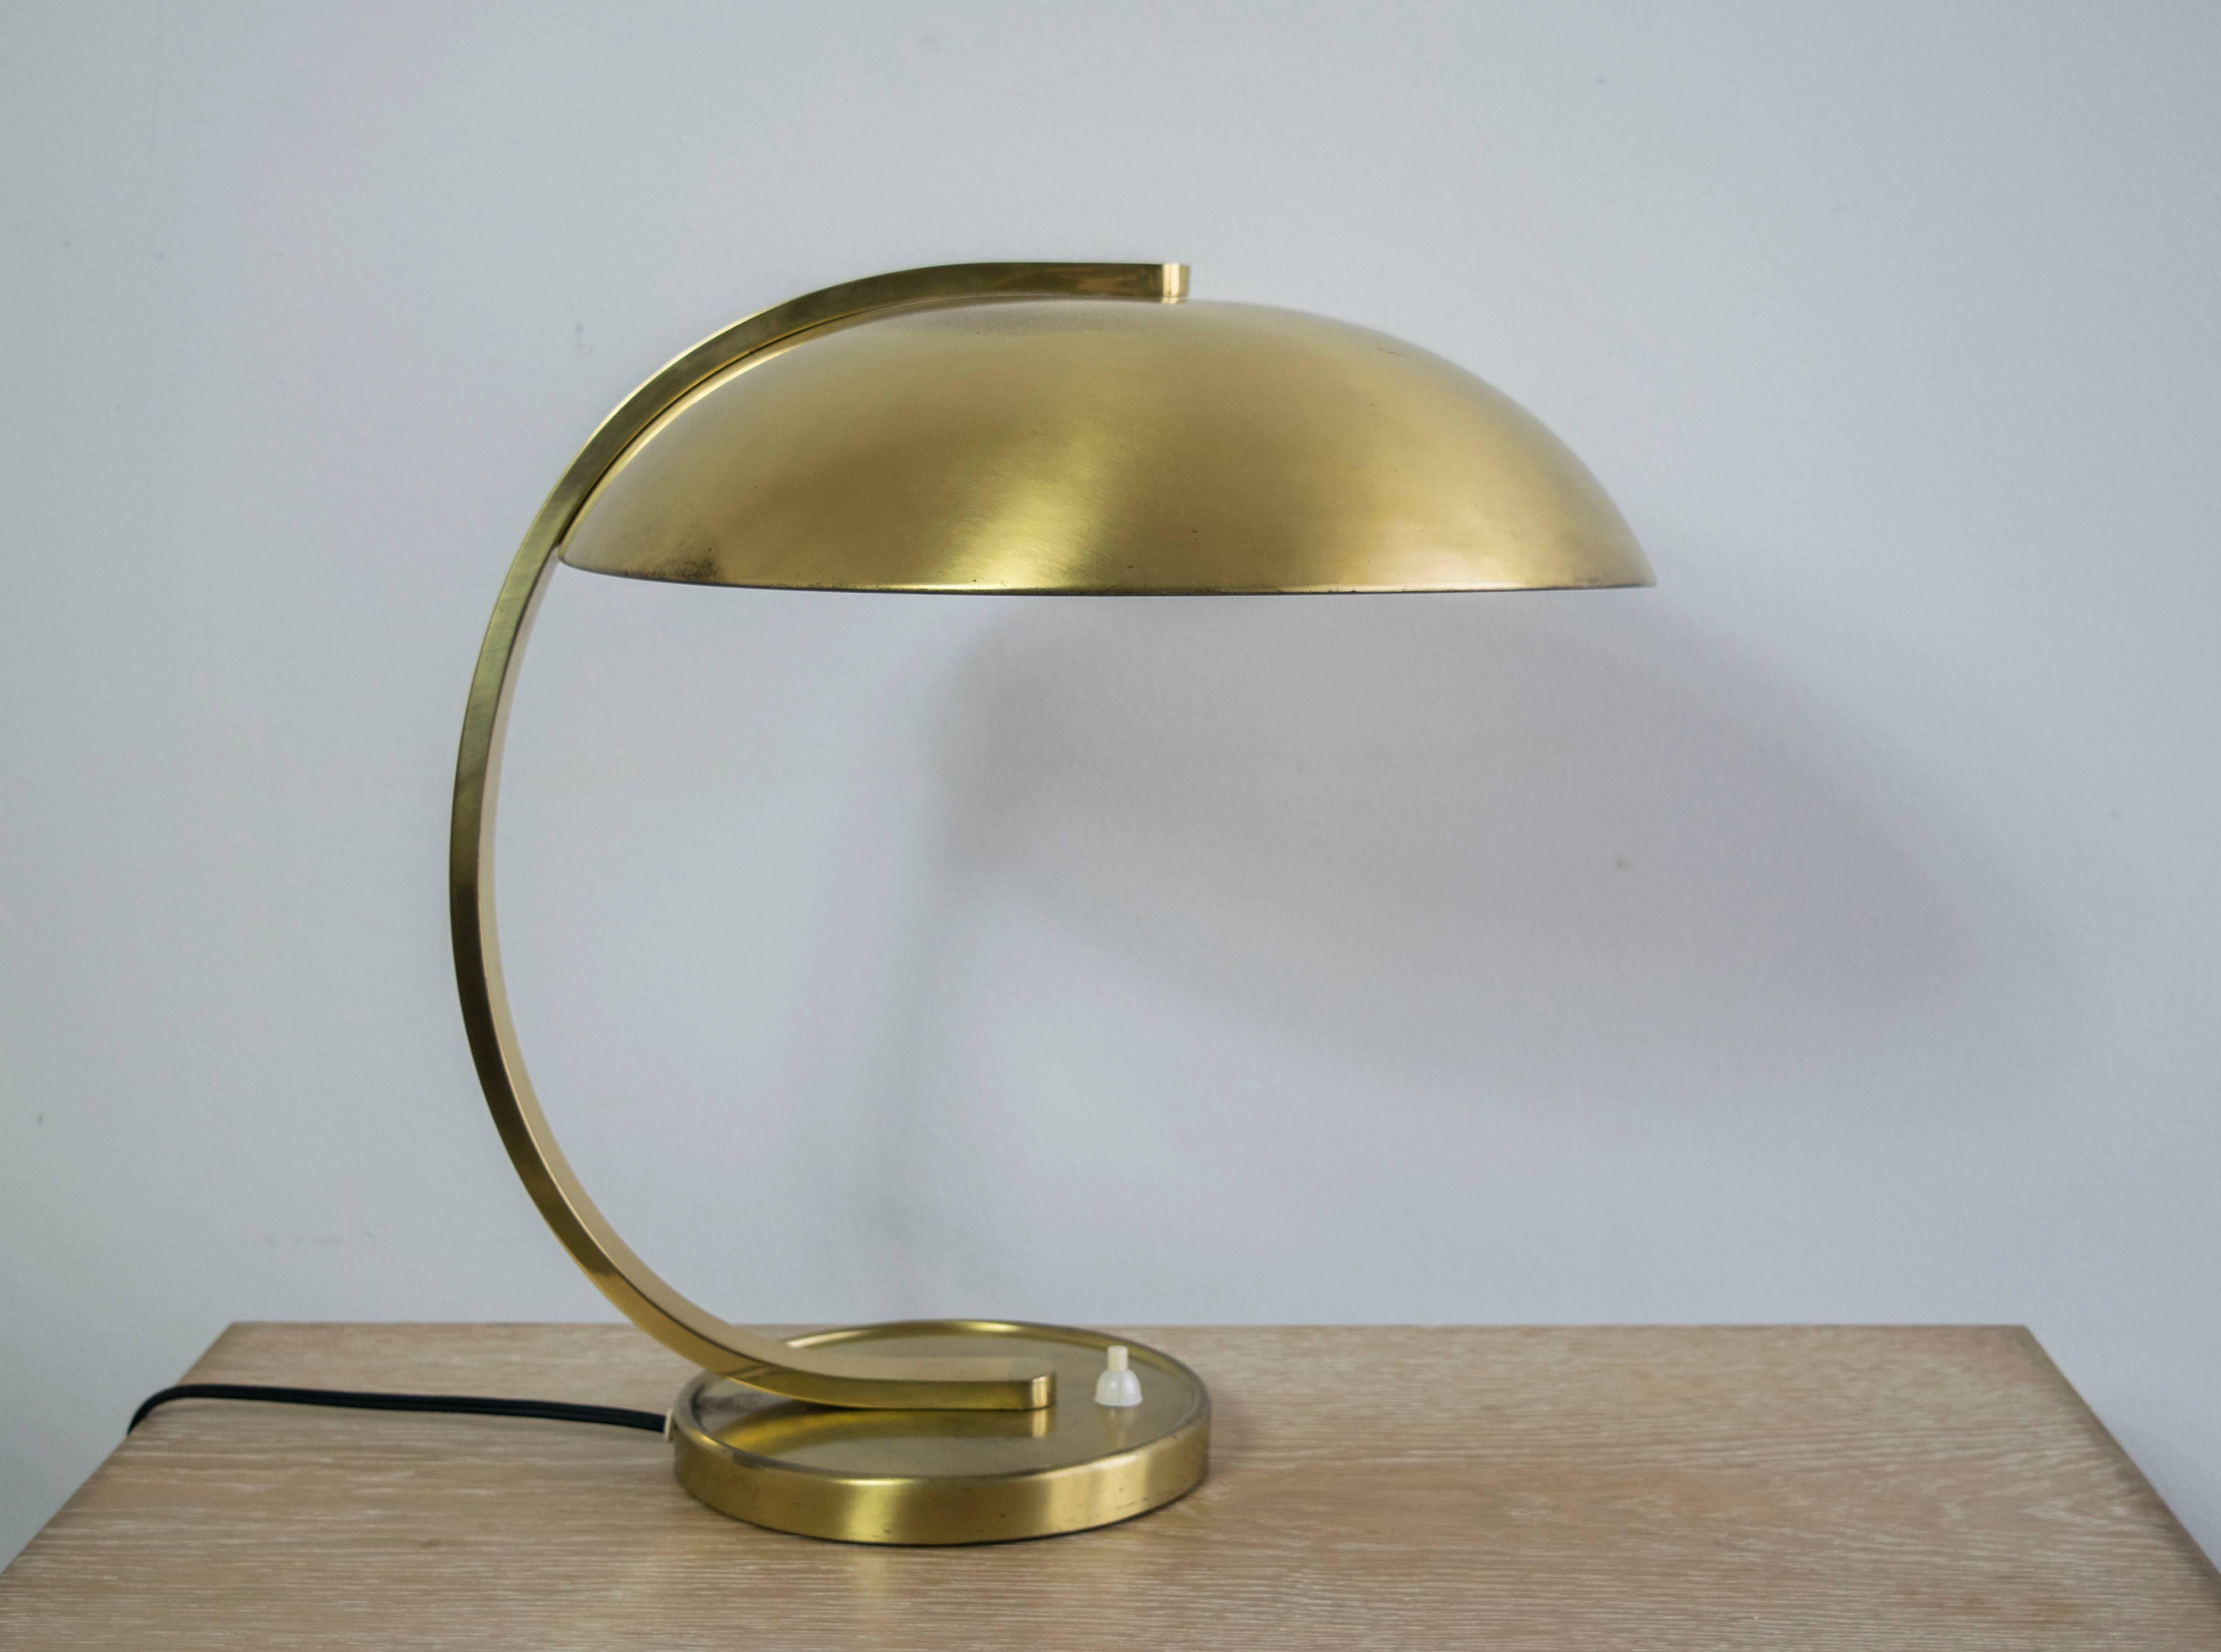 Beautifully articulated Bauhaus lamp very similar to Christian Dell's design.  Solid brass, recently rewired to US lighting standards.
